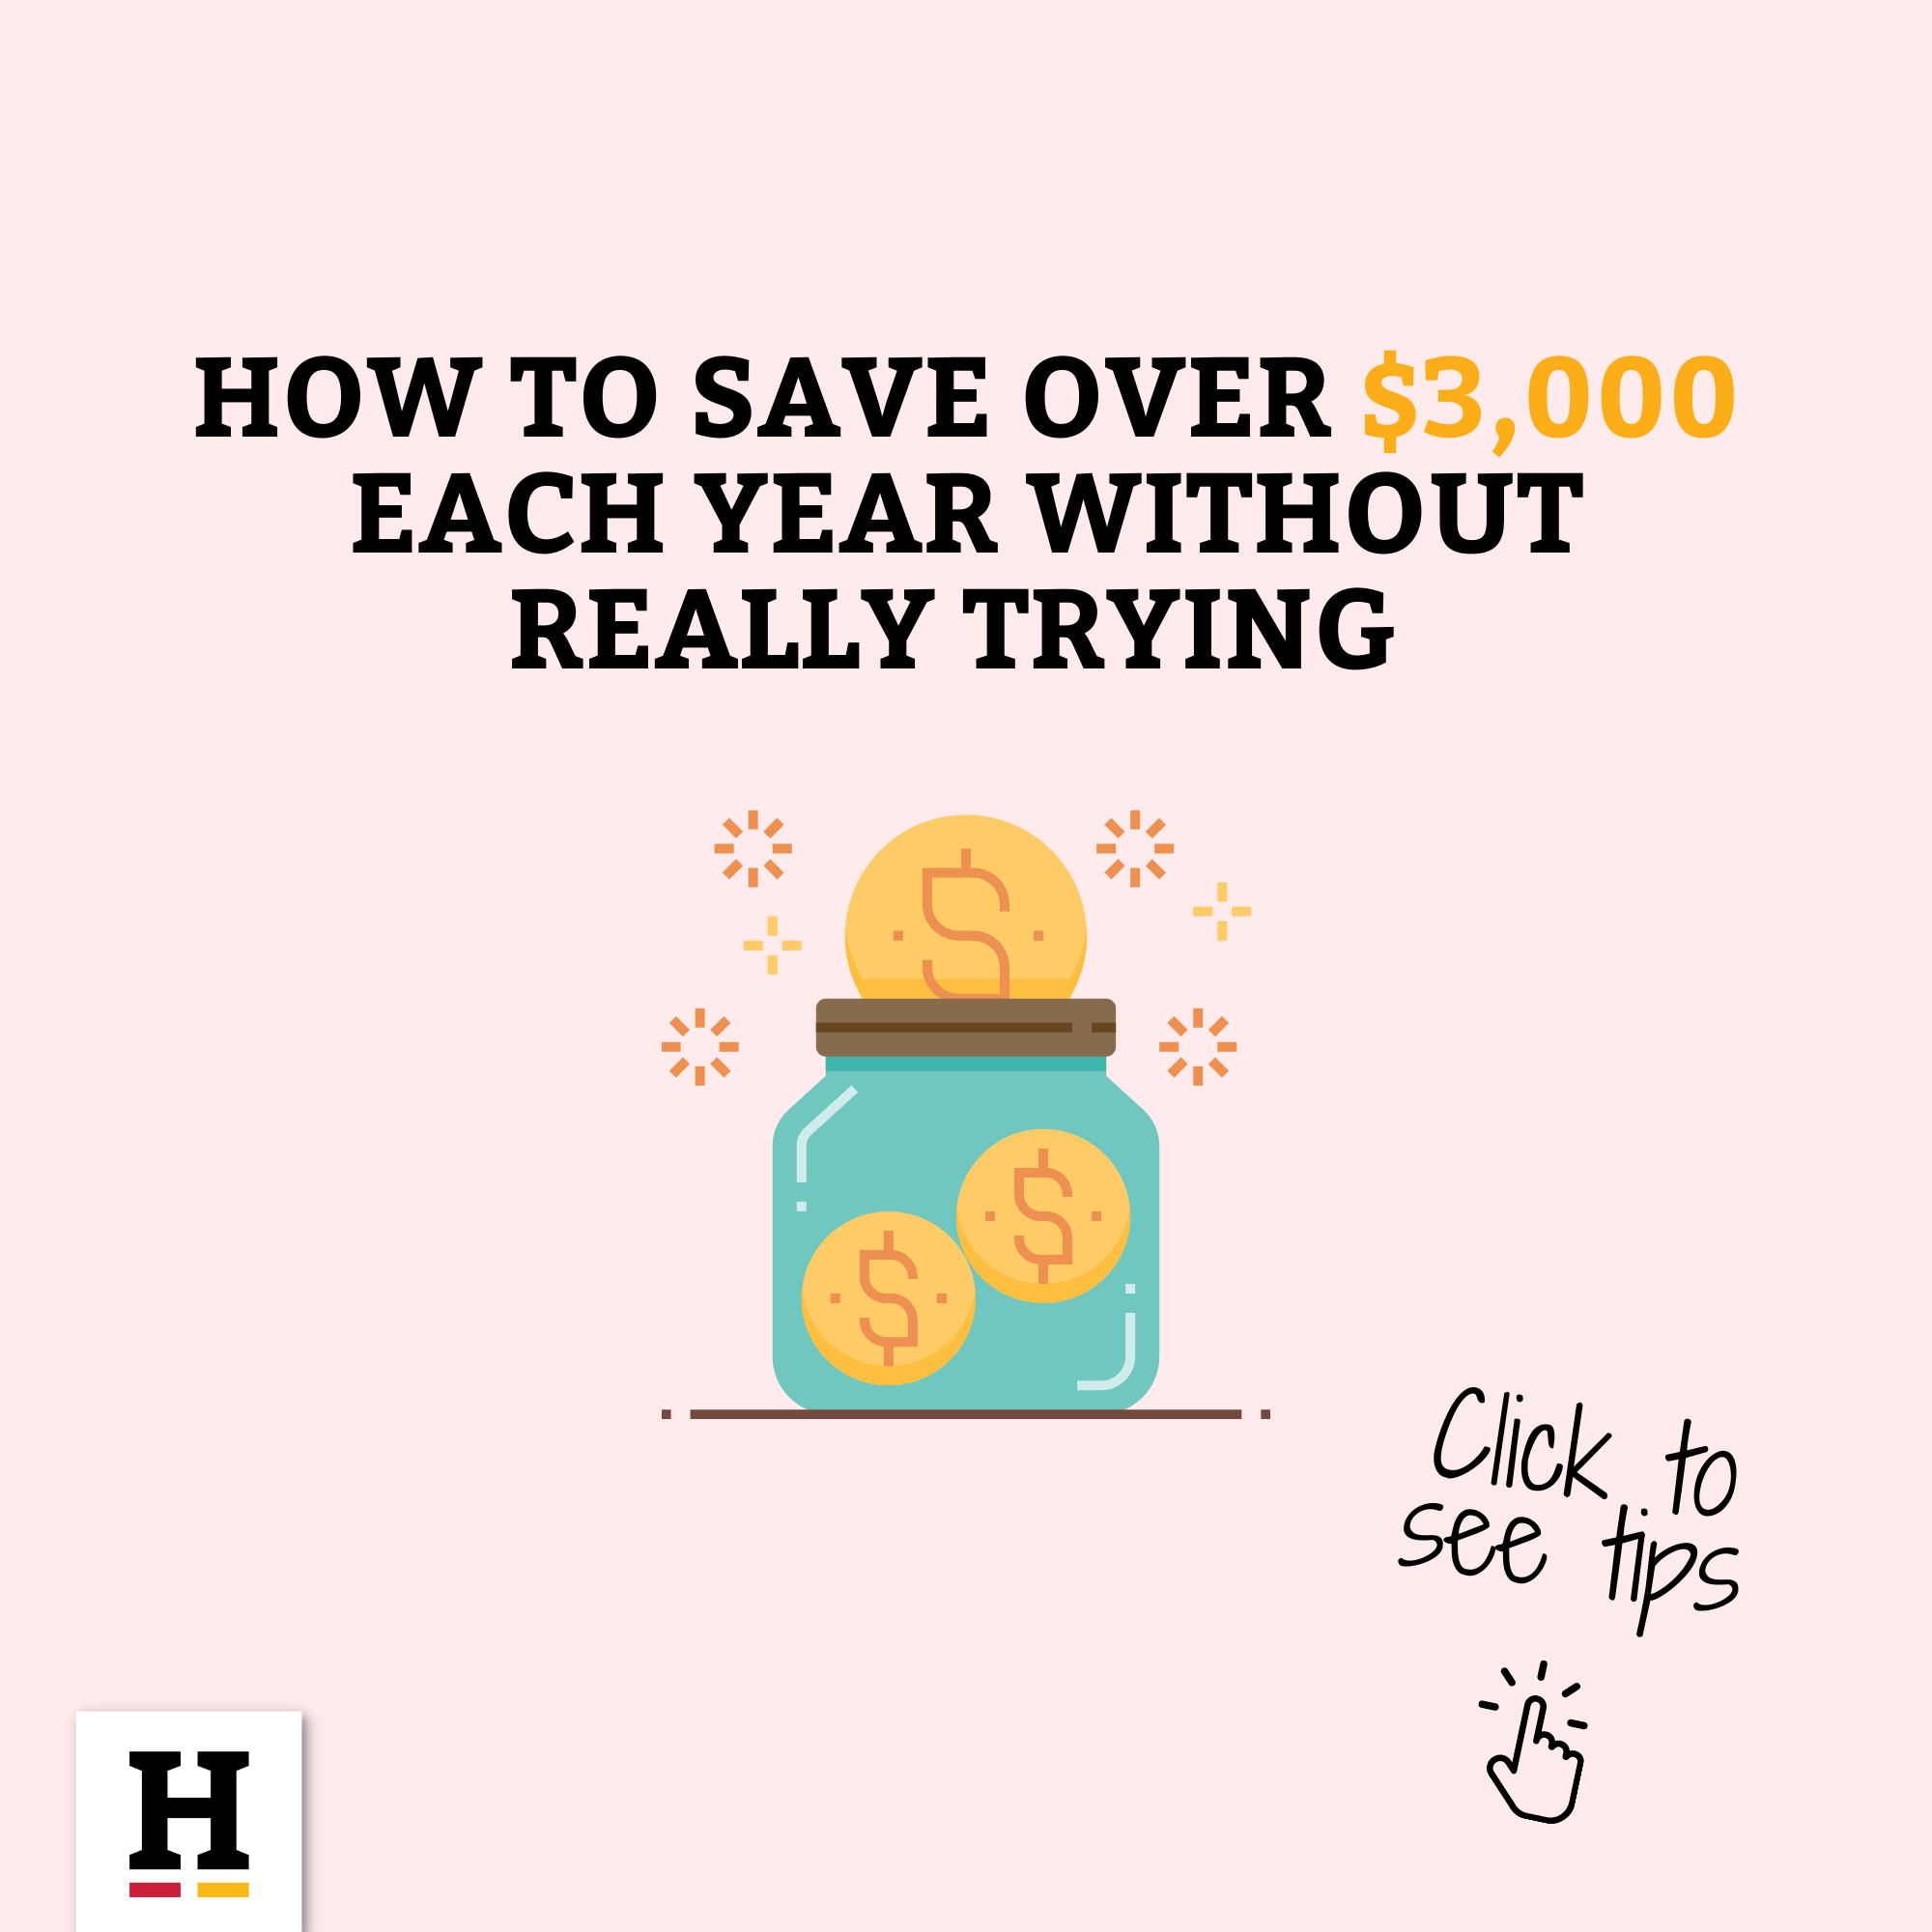 https://heritage.com.au/-/media/m/tools/infographics/thumbnails/how-to-save-without-trying-thumbnail.png?cx=0.5&cy=0.5&cw=2000&ch=2000&hash=74713890F58C4EC92370509DE2DB58C5A2923E75